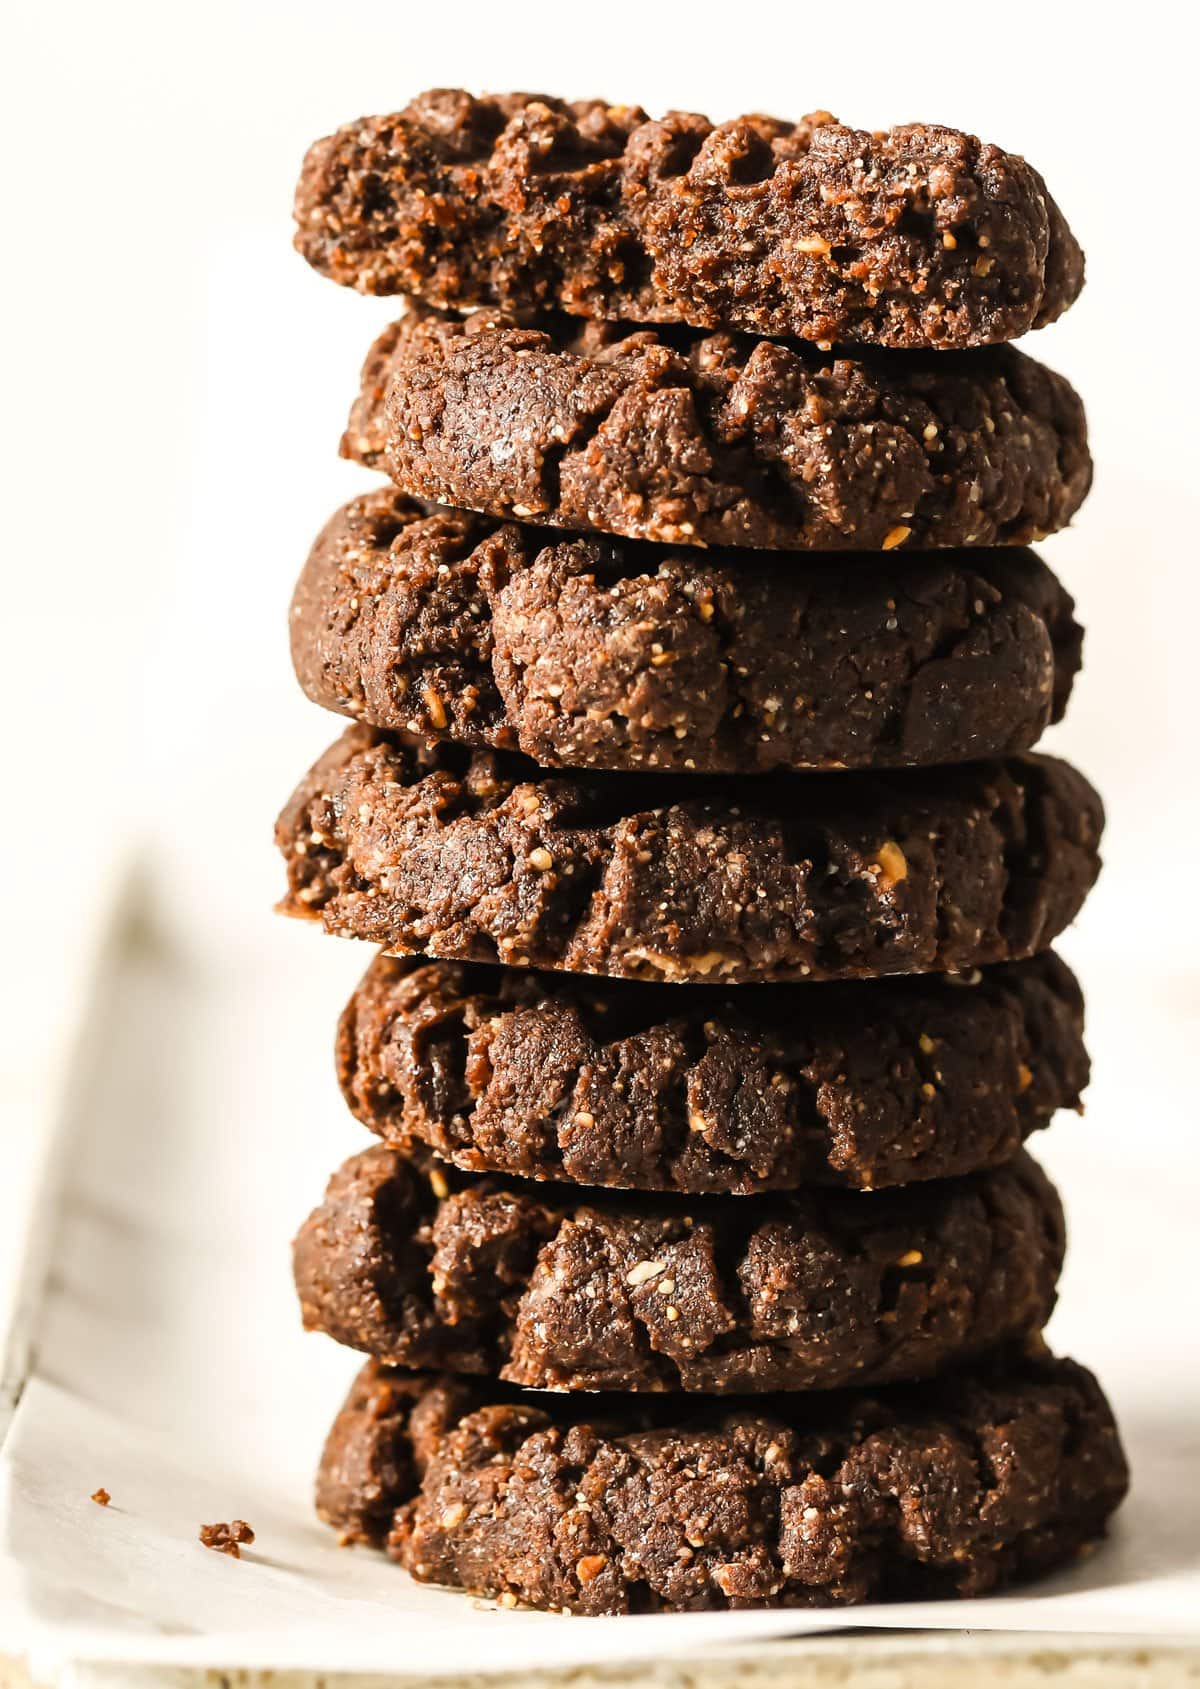 a stack of Nutella cookies